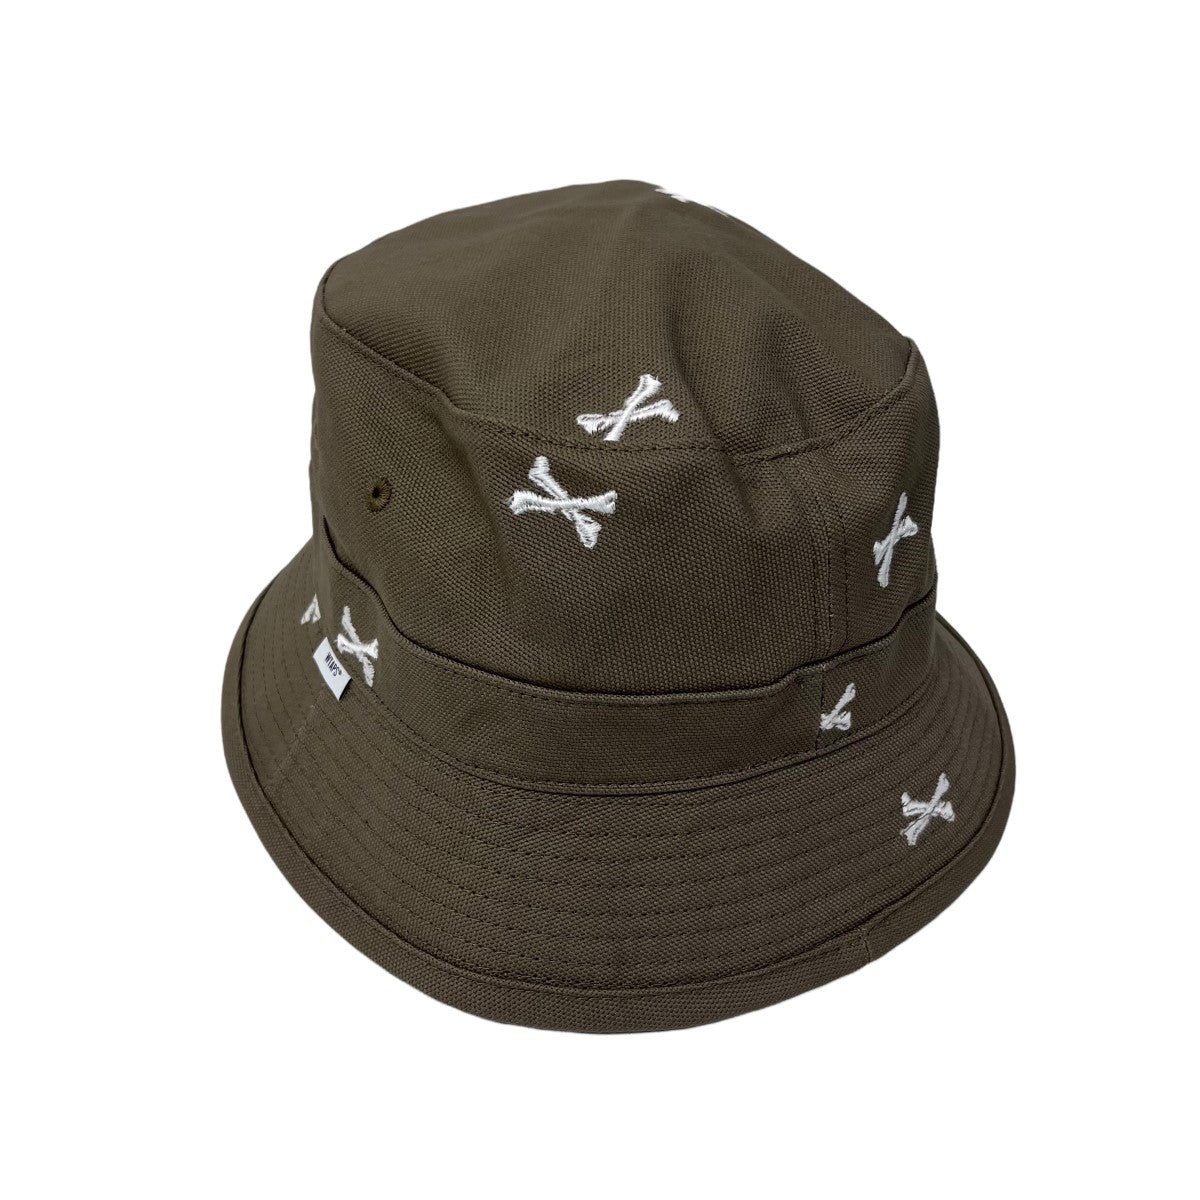 WTAPS(ダブルタップス) 22SS「BUCKET 02 ／ HAT ／ COTTON． OXFORD． TEXTILE」ハット